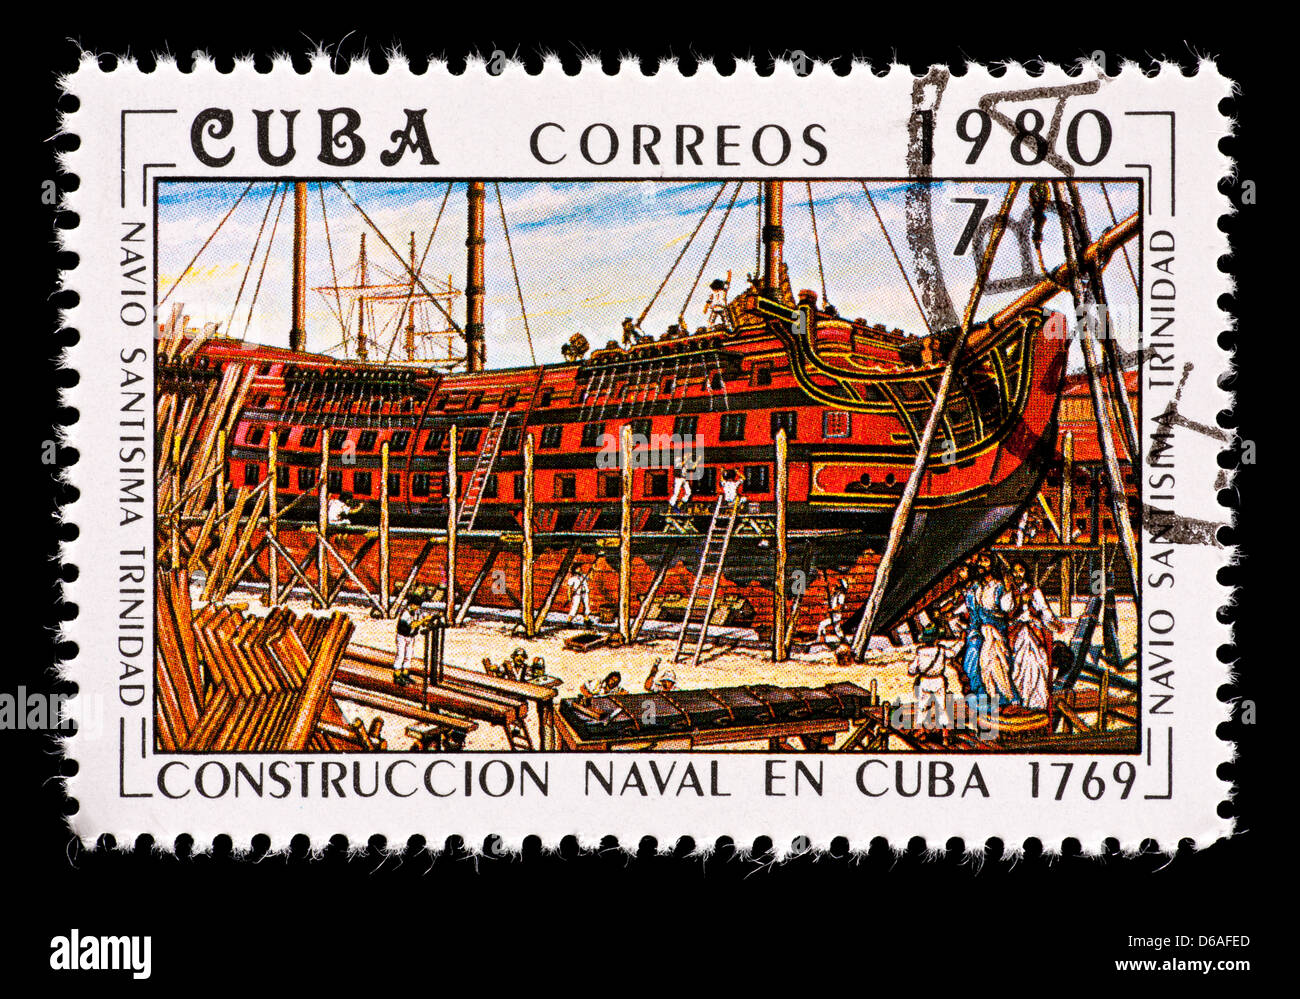 Postage stamp from Cuba depicting the construction of the naval vessel Santisima Trinidad. Stock Photo